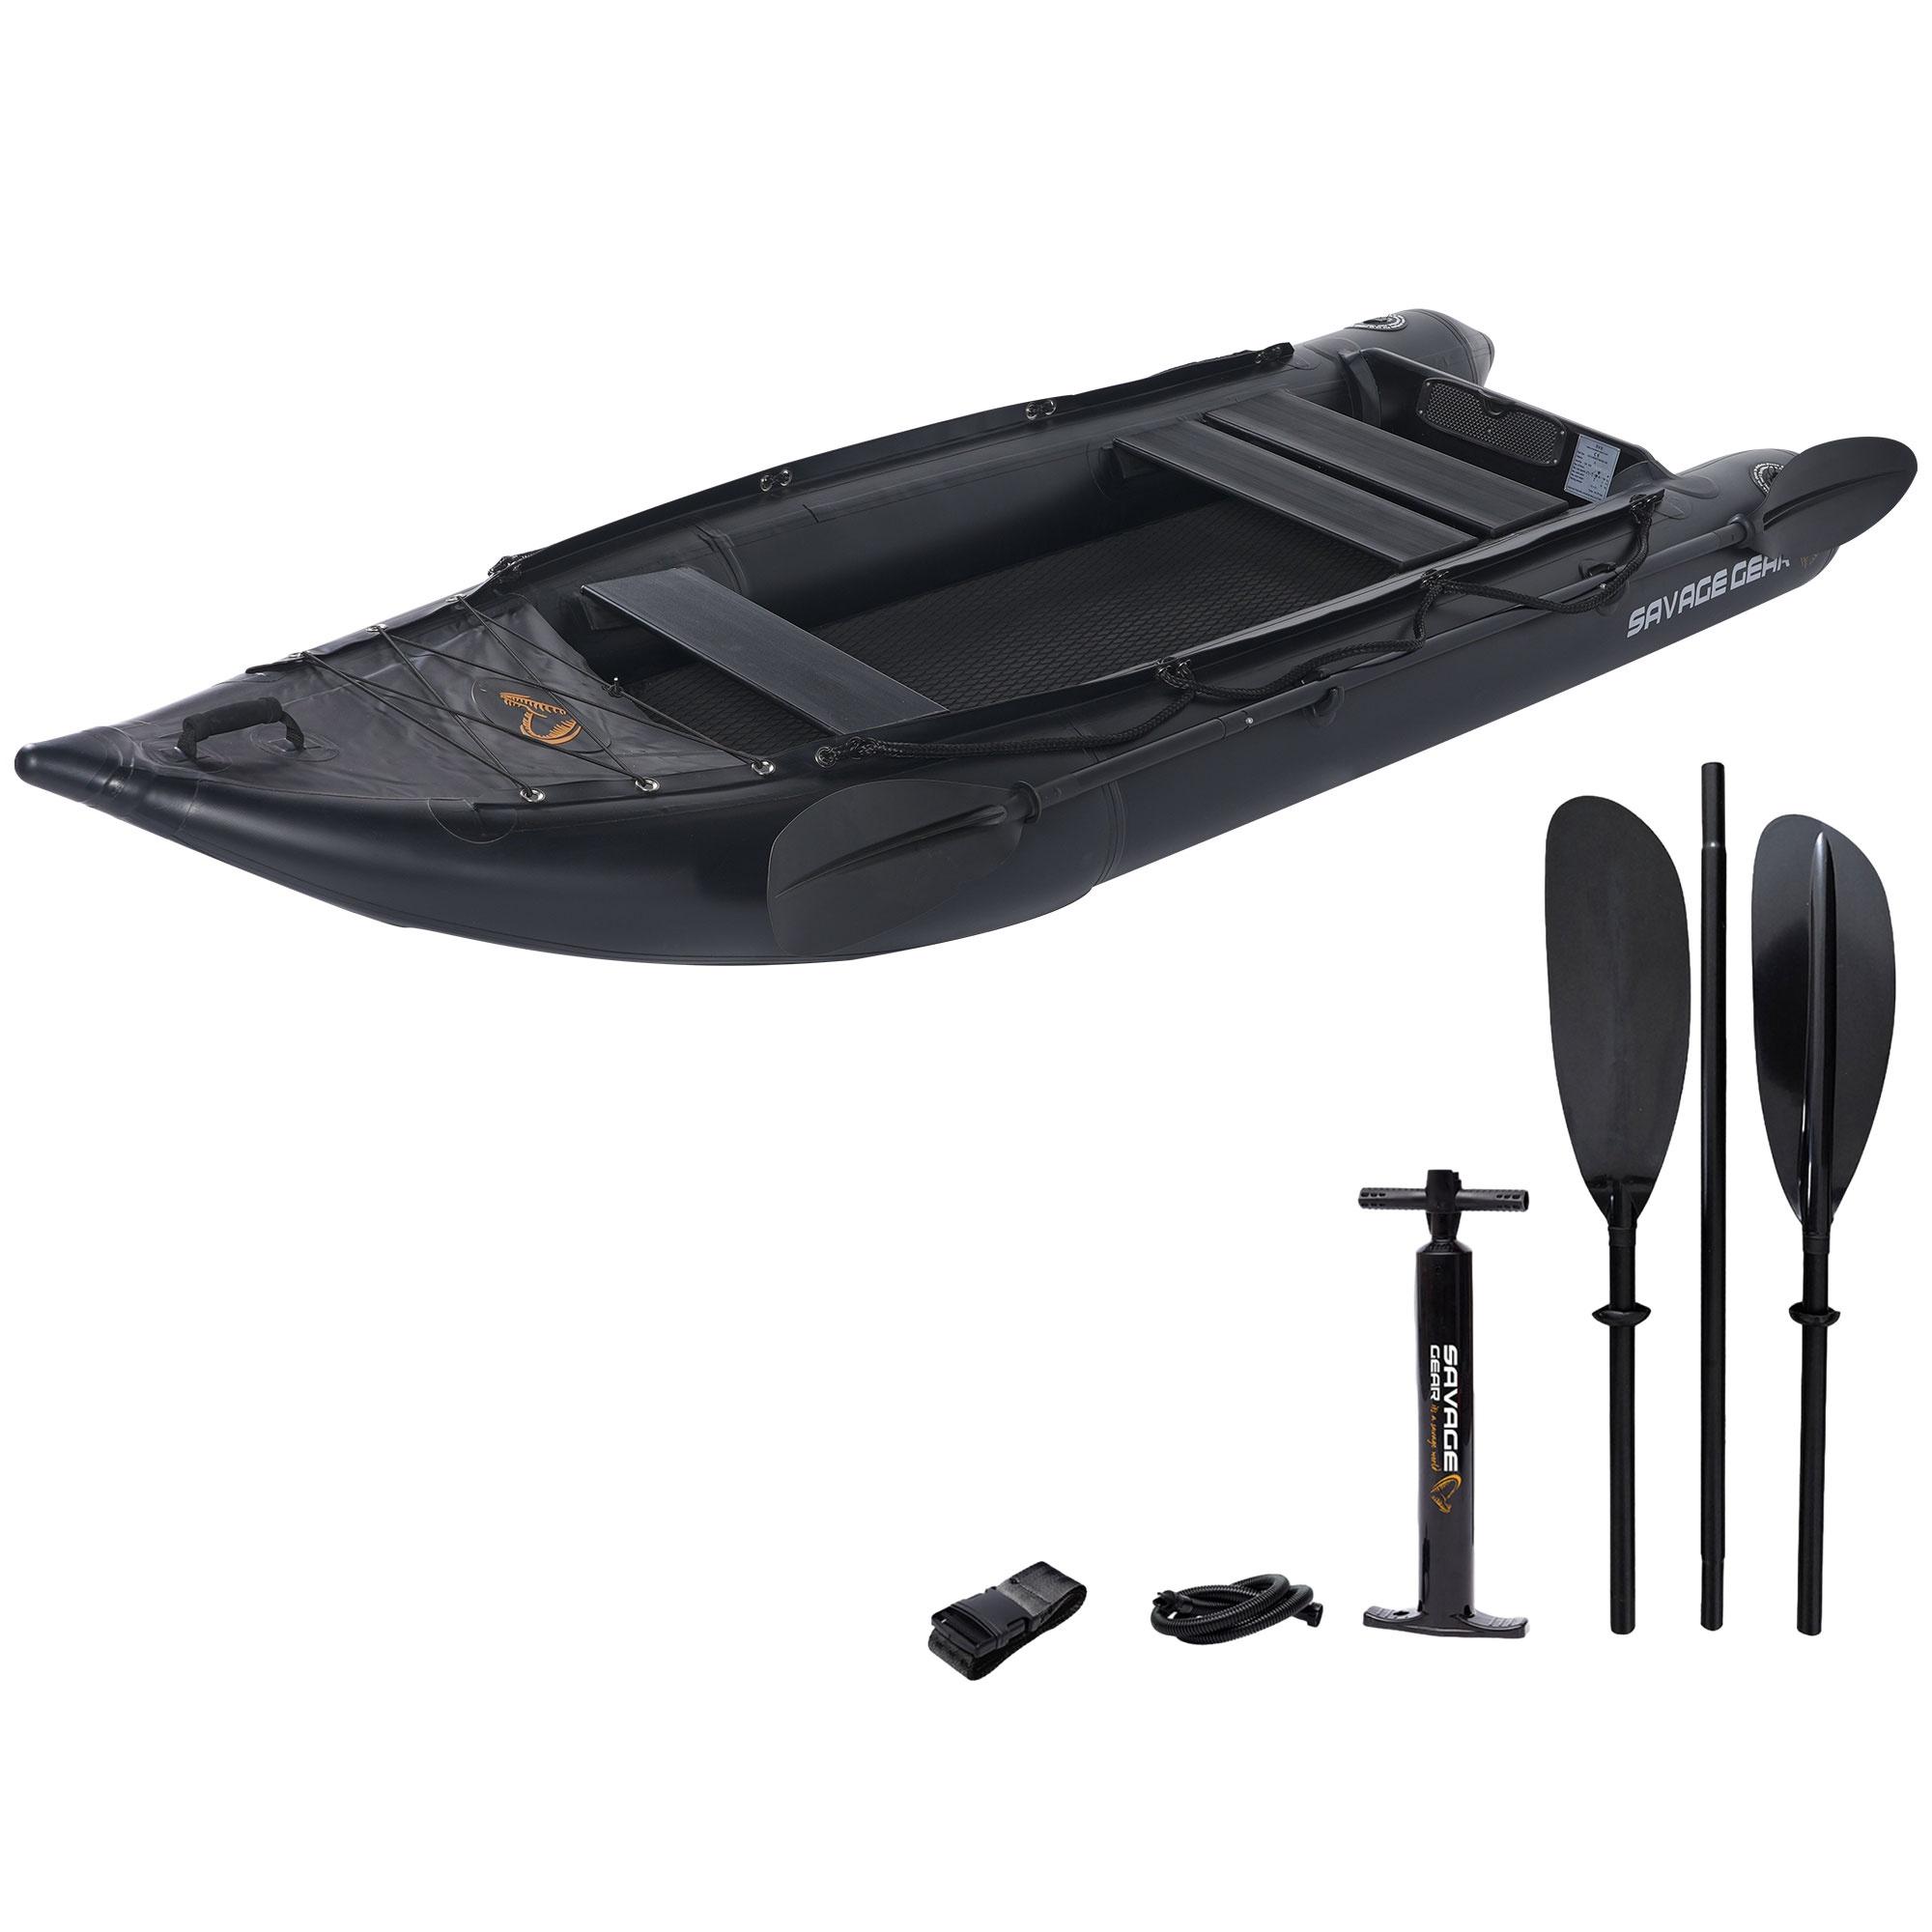 130'' Sit-on-Top Fishing Kayak with Aluminum Oar, 2-Person Inflatable Kayak with Pump, Aluminum Alloy Seat, Portable Recreational Touring Kayak with Inflatable Mat, Repair Kit, Black - image 1 of 9